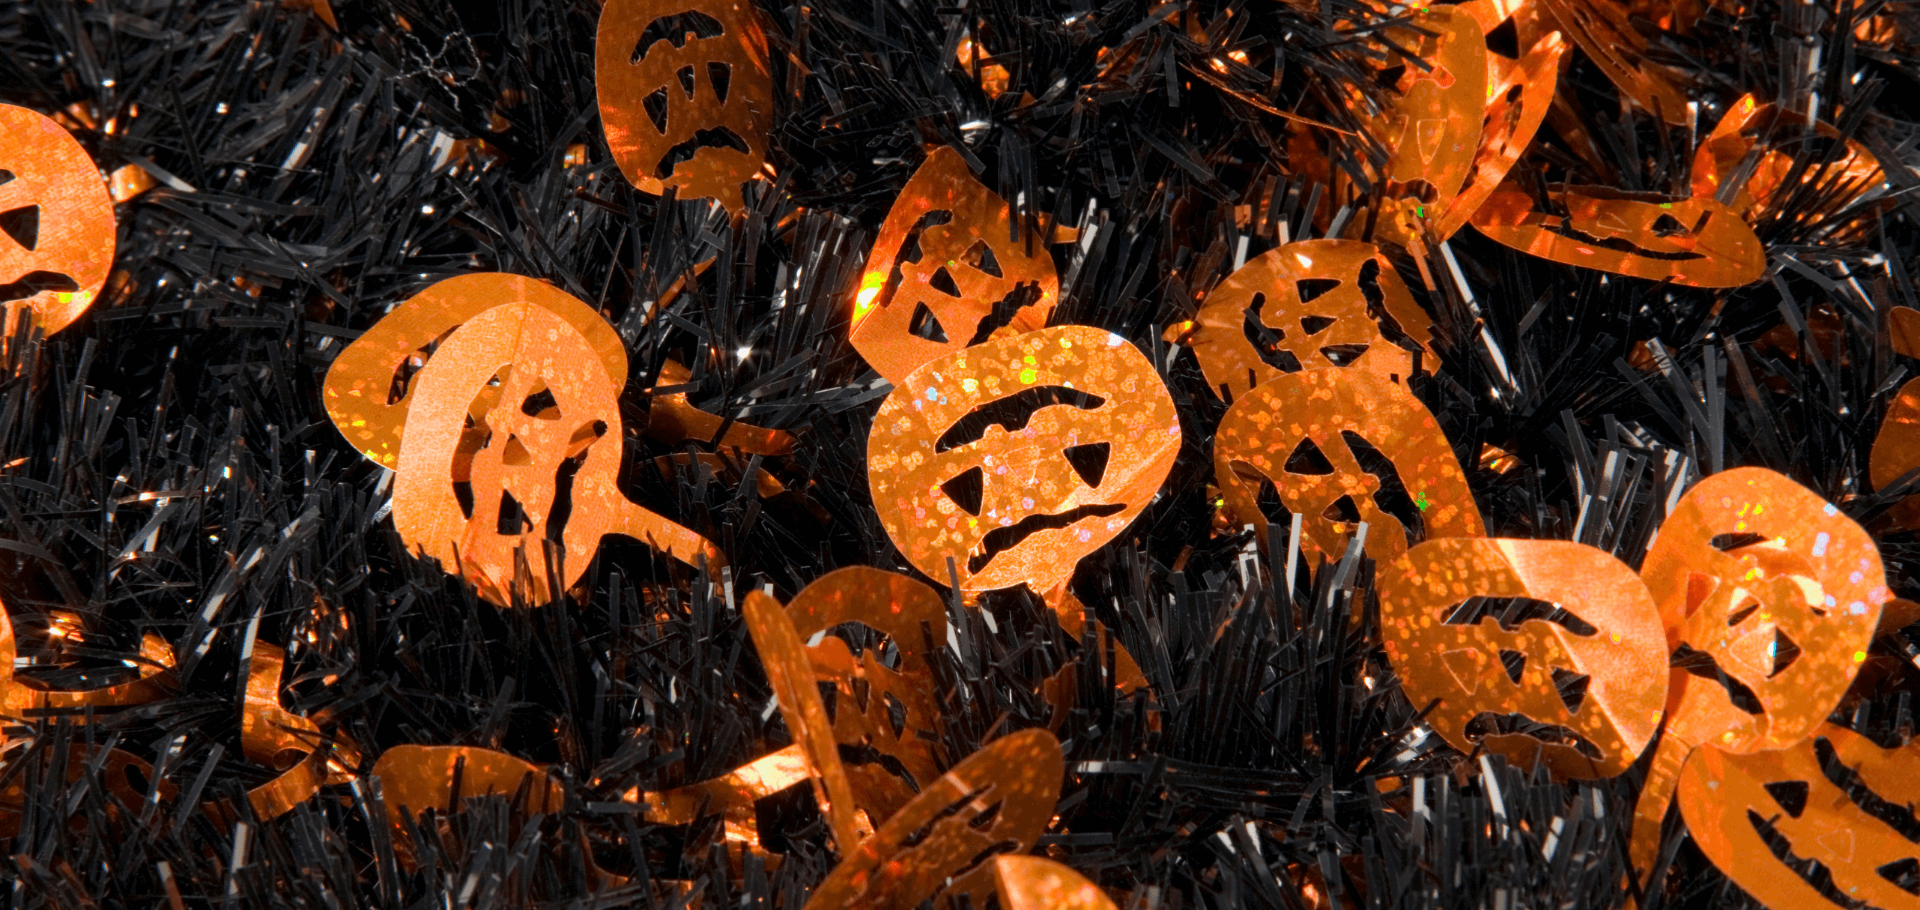 The Best Halloween Decorations For Your Lawn